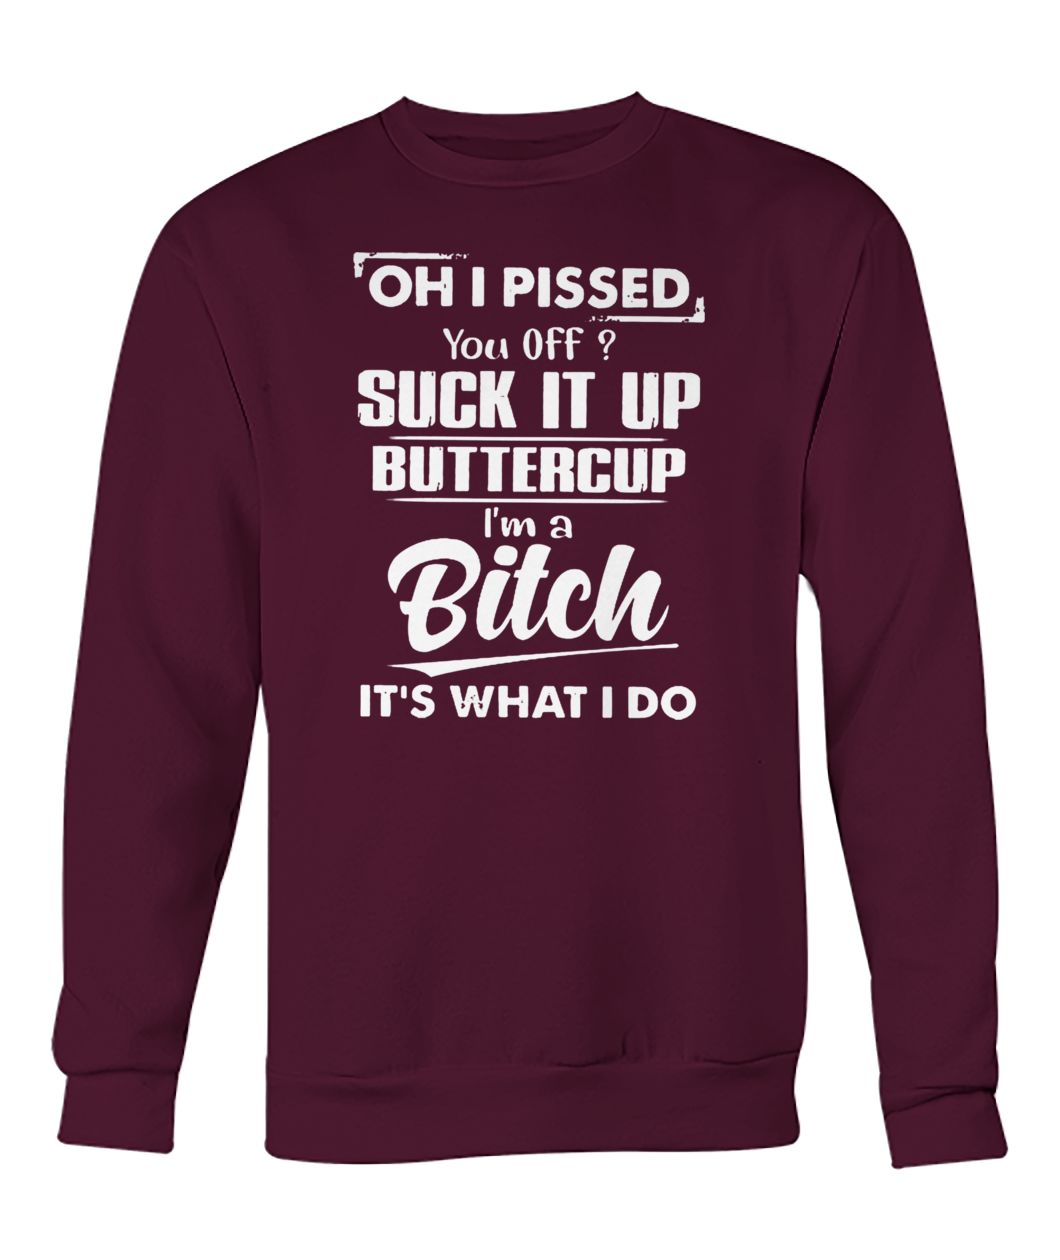 Oh I pissed you off suck it up buttercup I’m a bitch it’s what I do crew neck sweatshirt